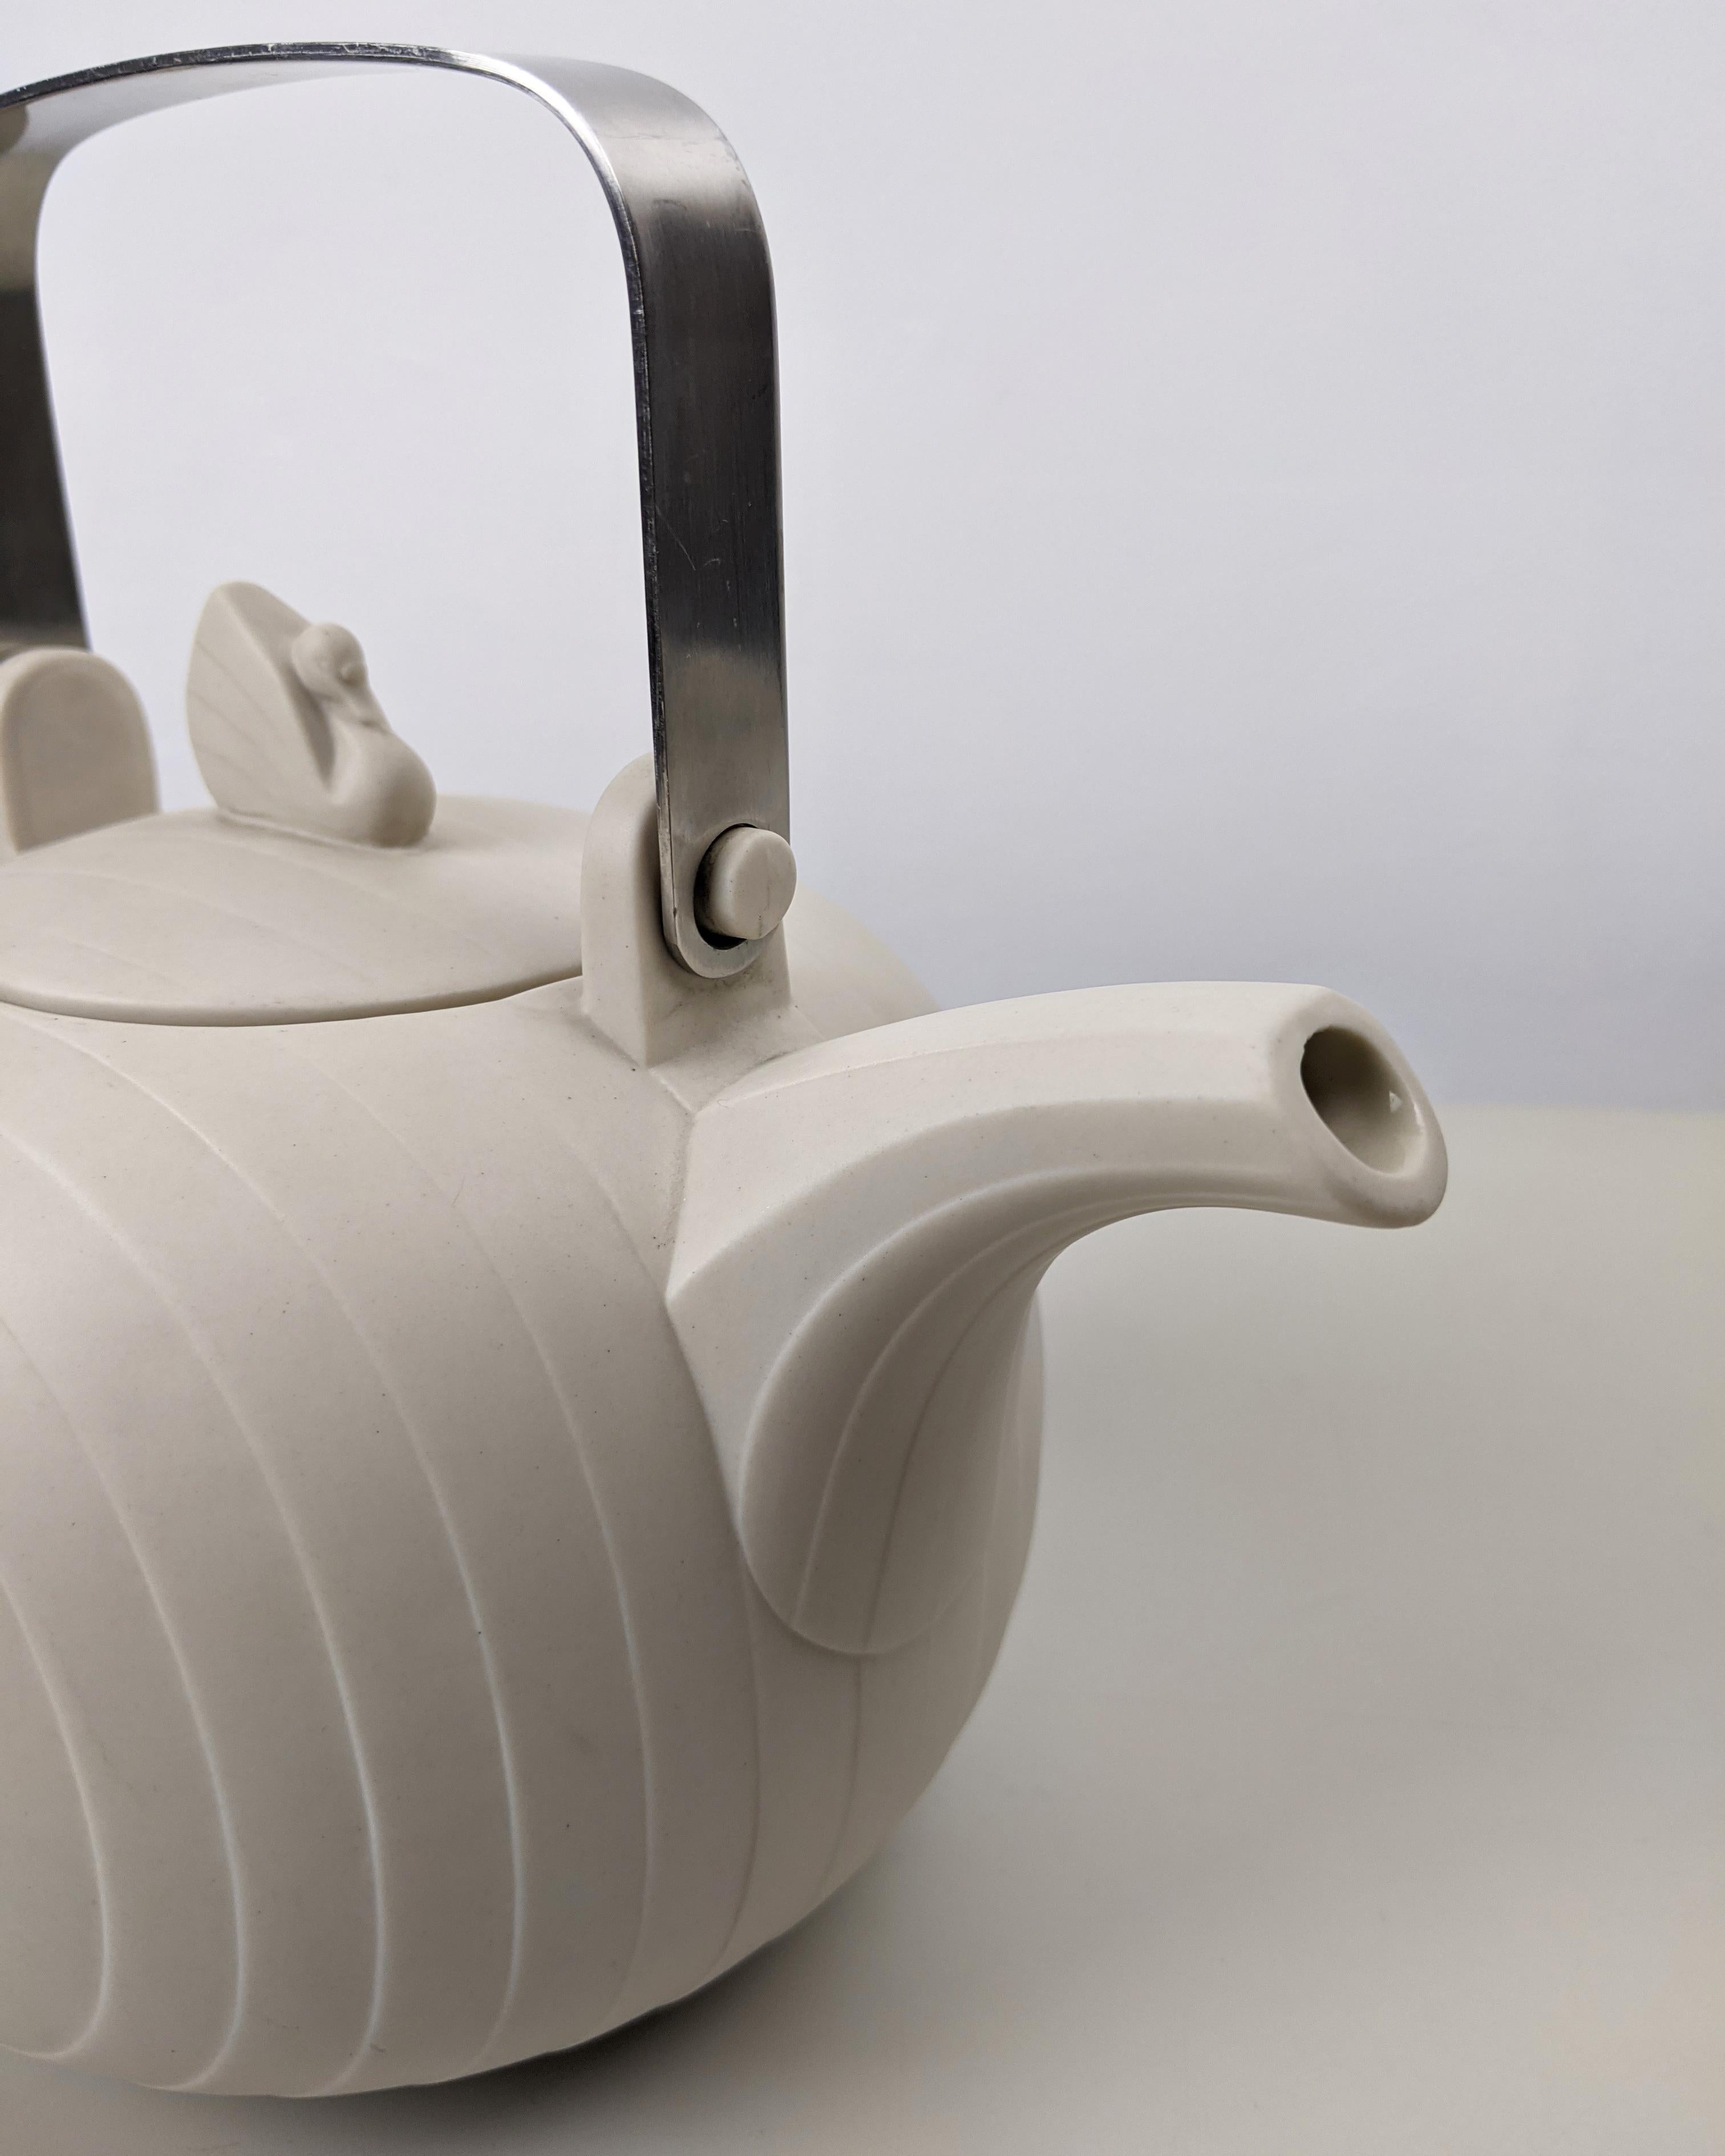 Molded Hornsea Teapot from the ‘Concept’ Series, Designed 1977 by Martin Hunt